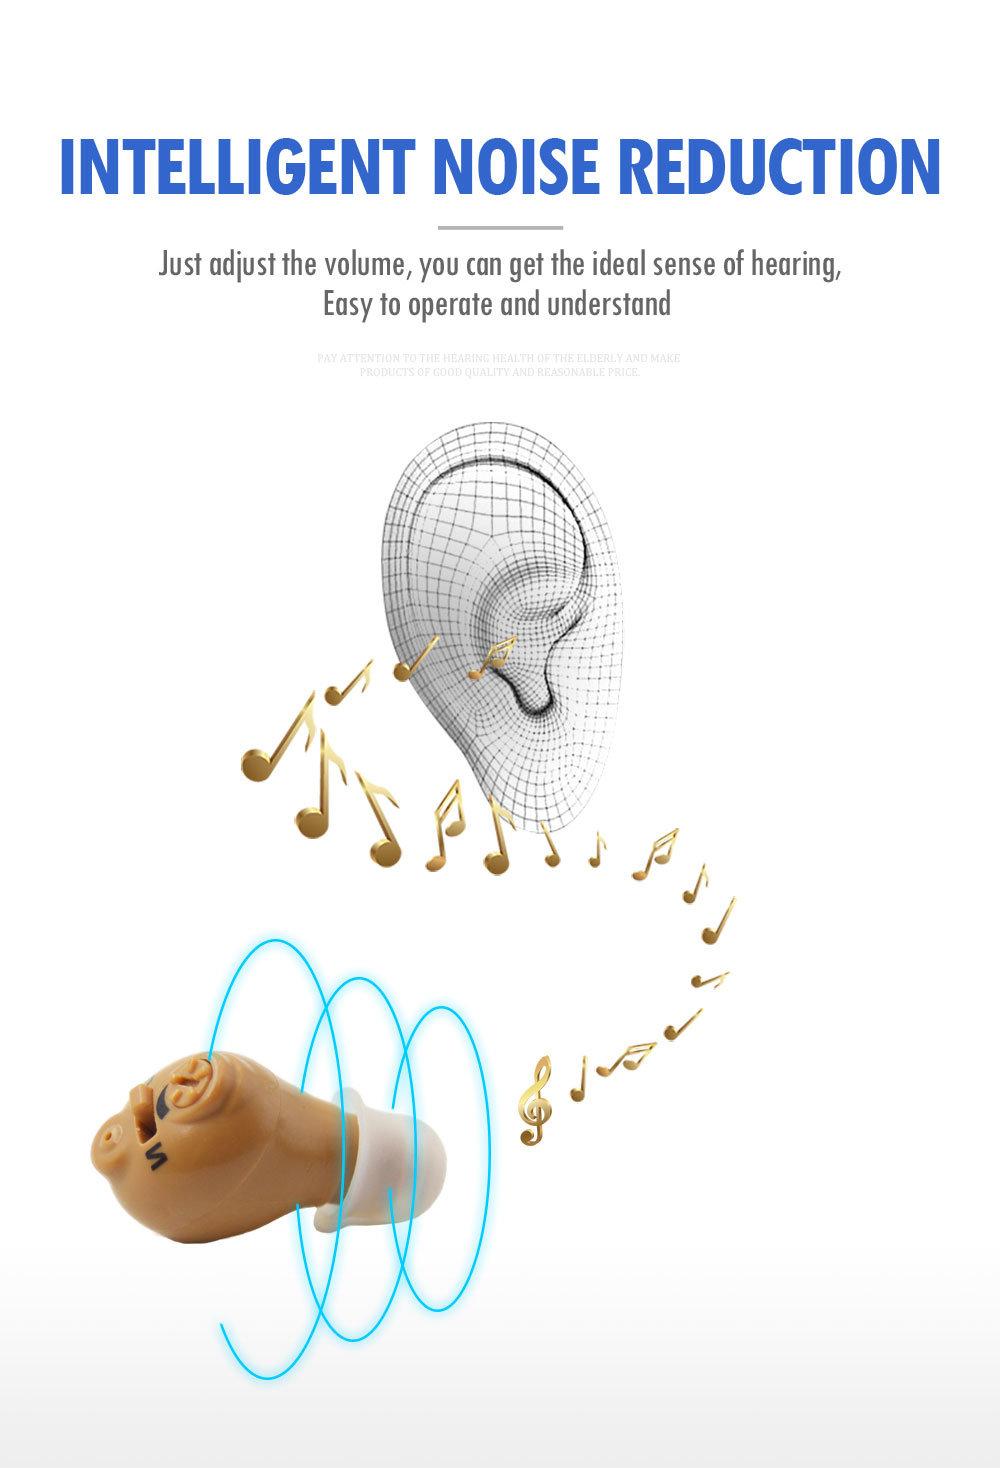 Aids Price Rechargeable Mini Rite Sound Emplifie Hearing Aid